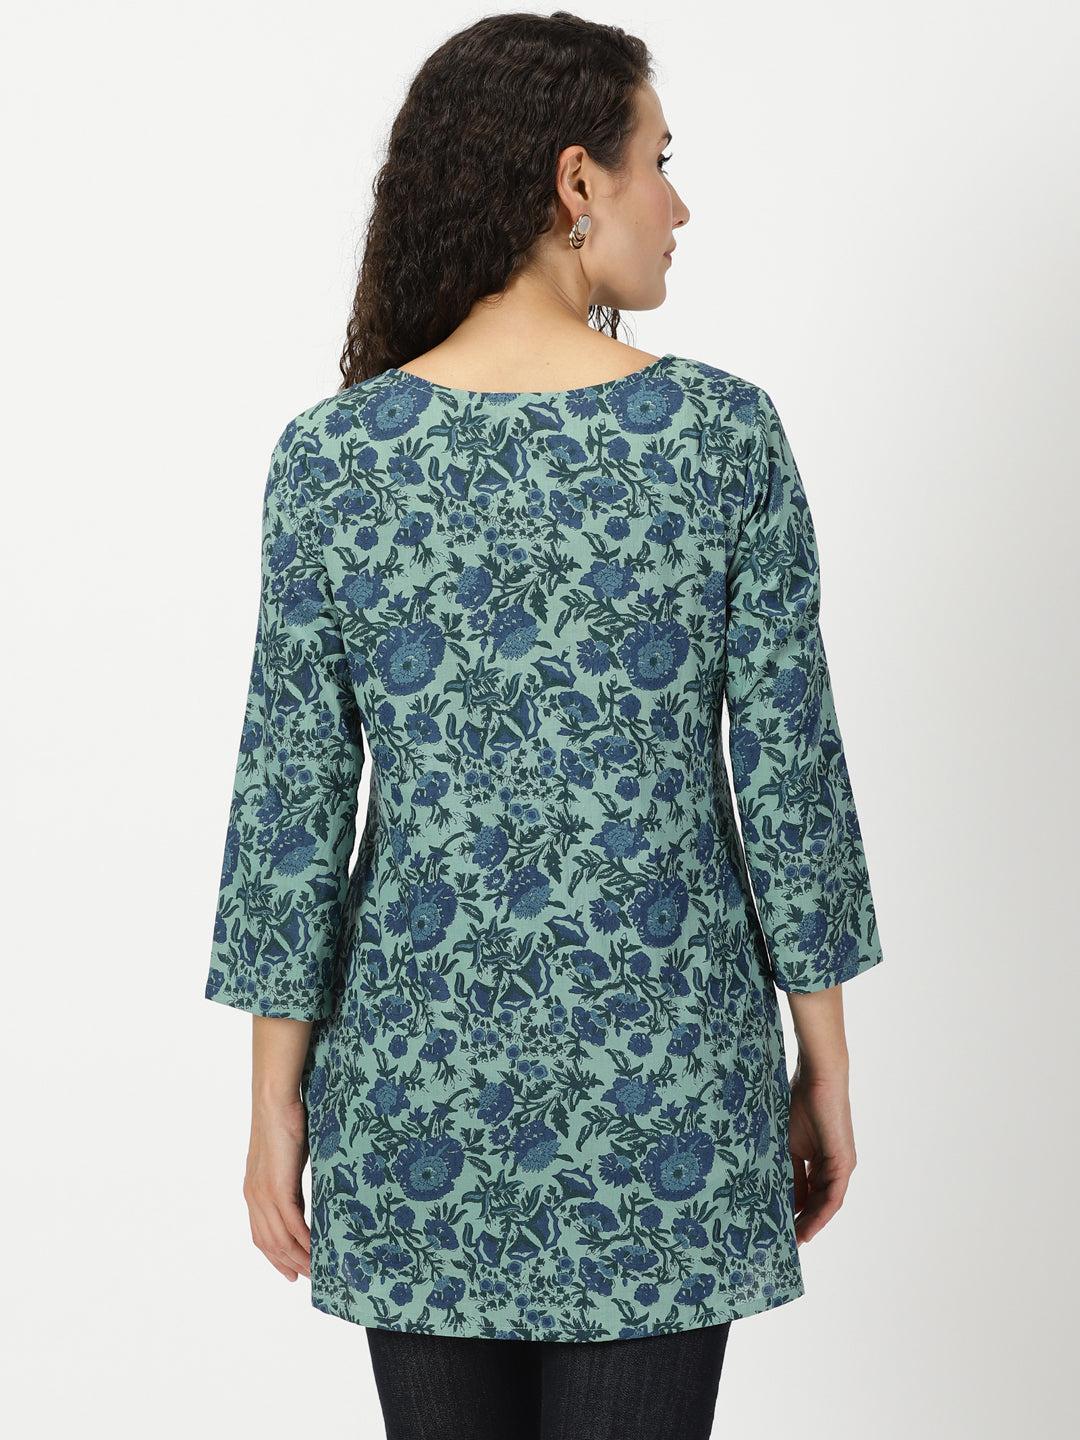 Embroidered Floral Cotton Tunic from India - Floral Sonata